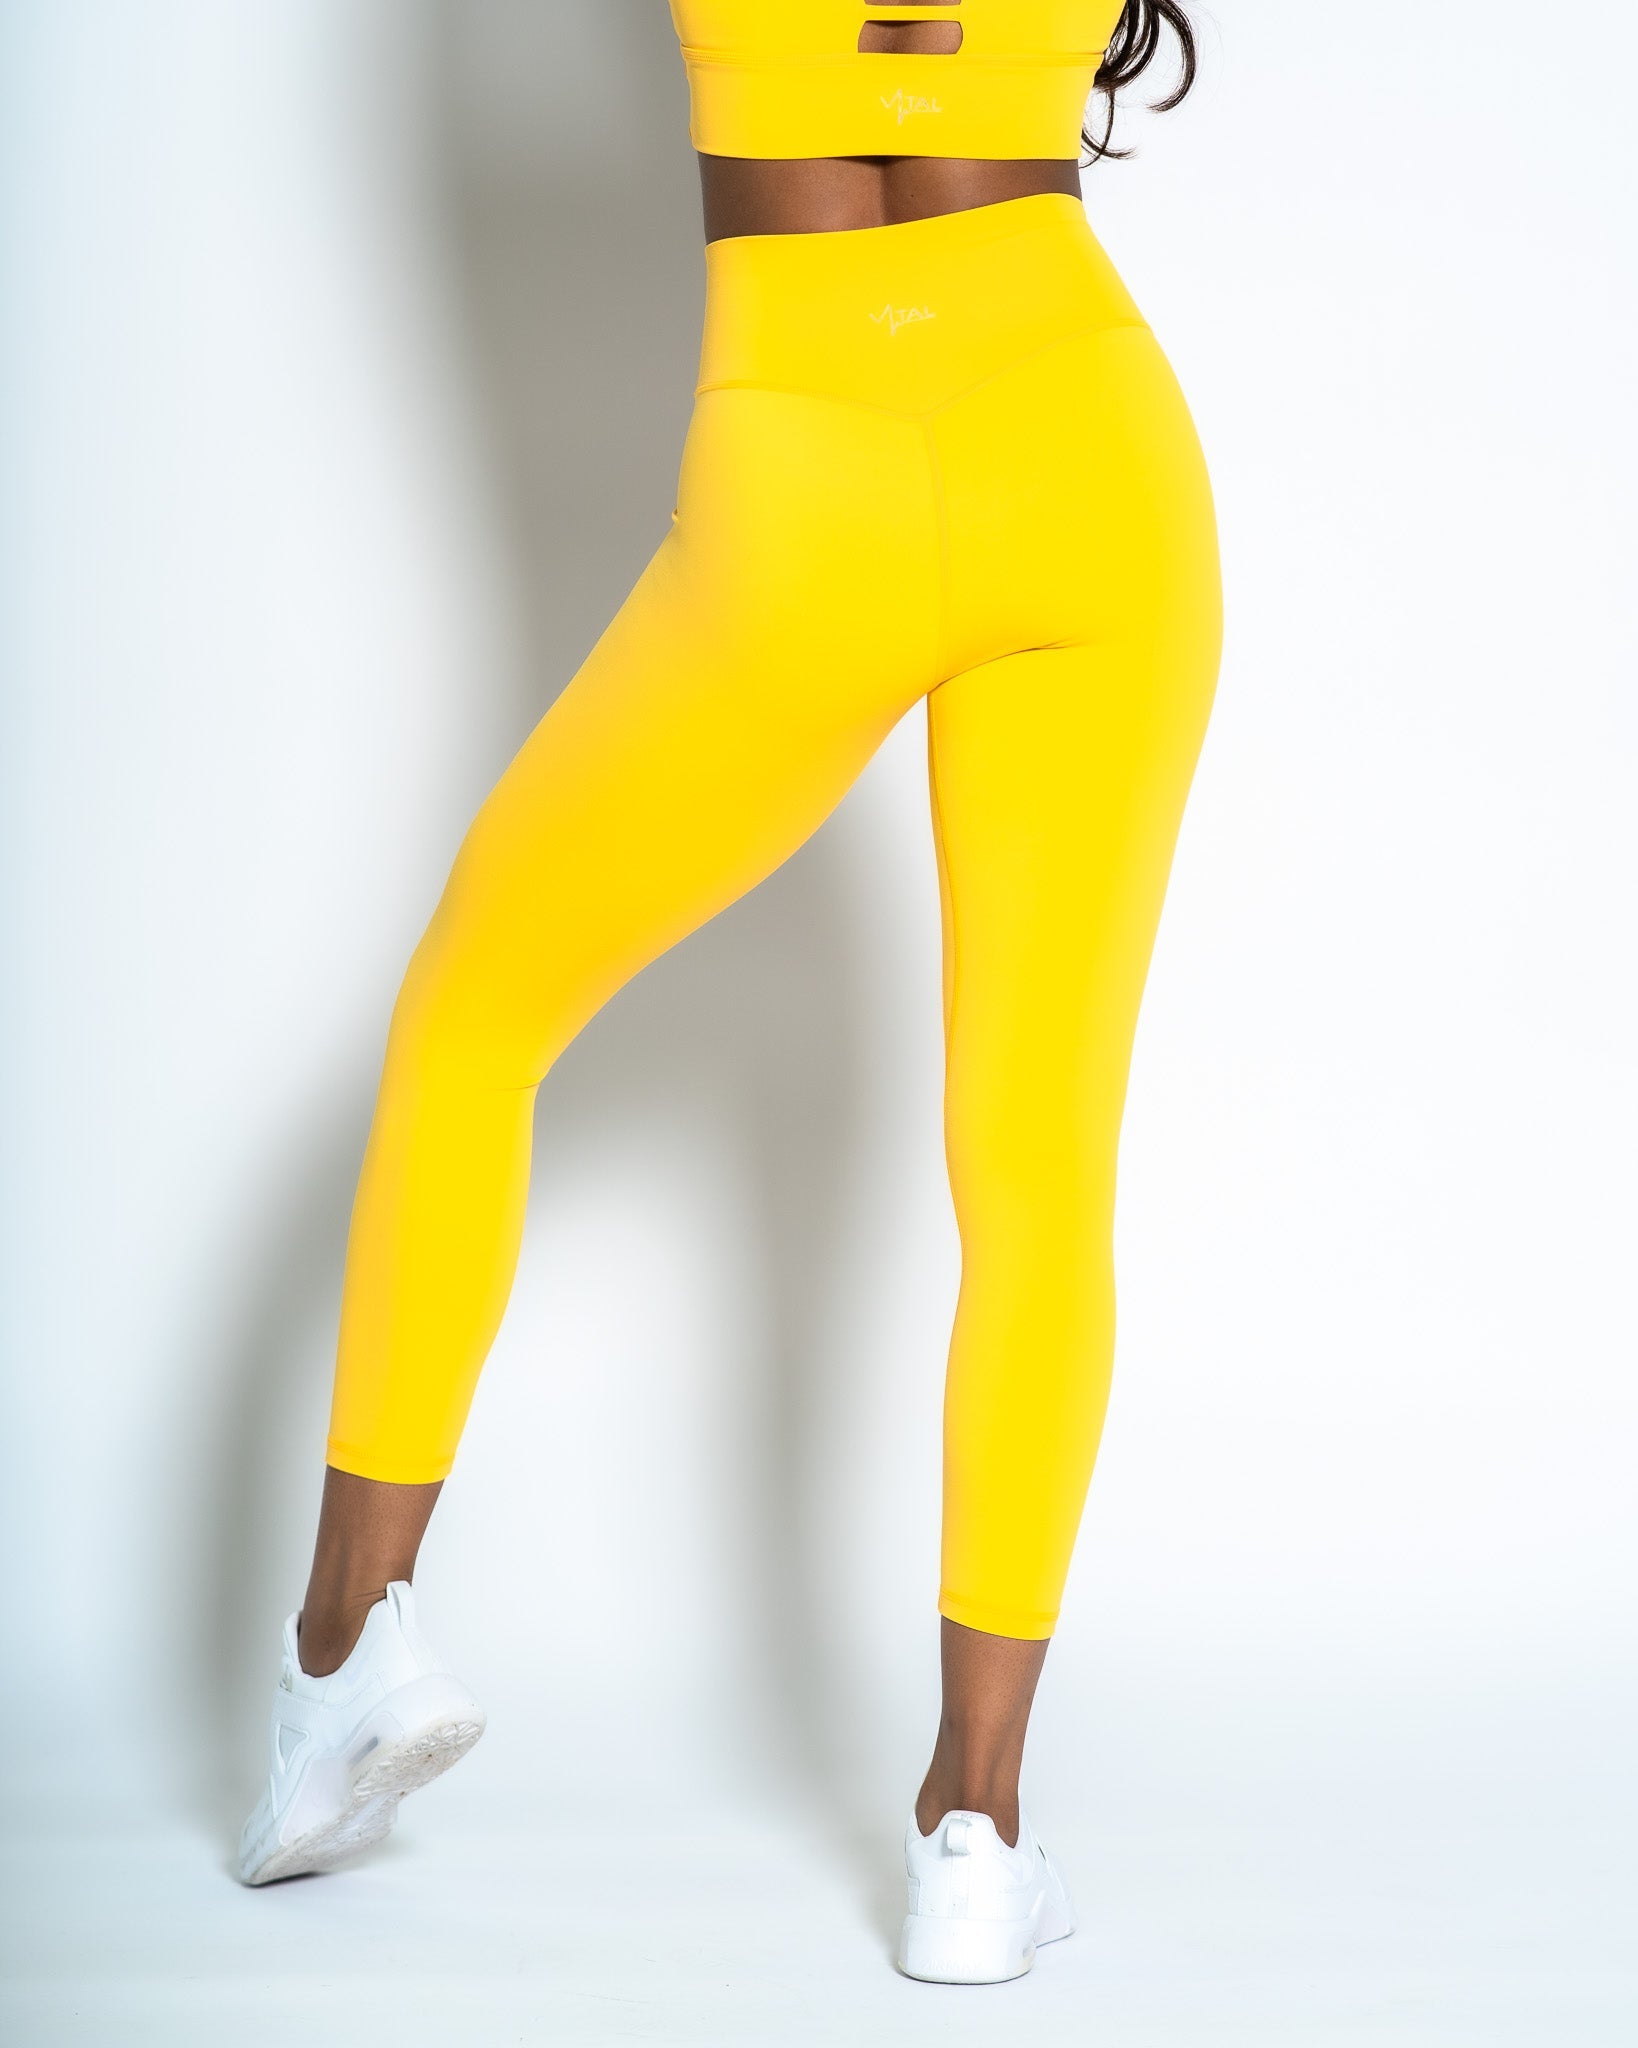 Women's Tapered Waistband Leggings - Neon Yellow Solid Workout